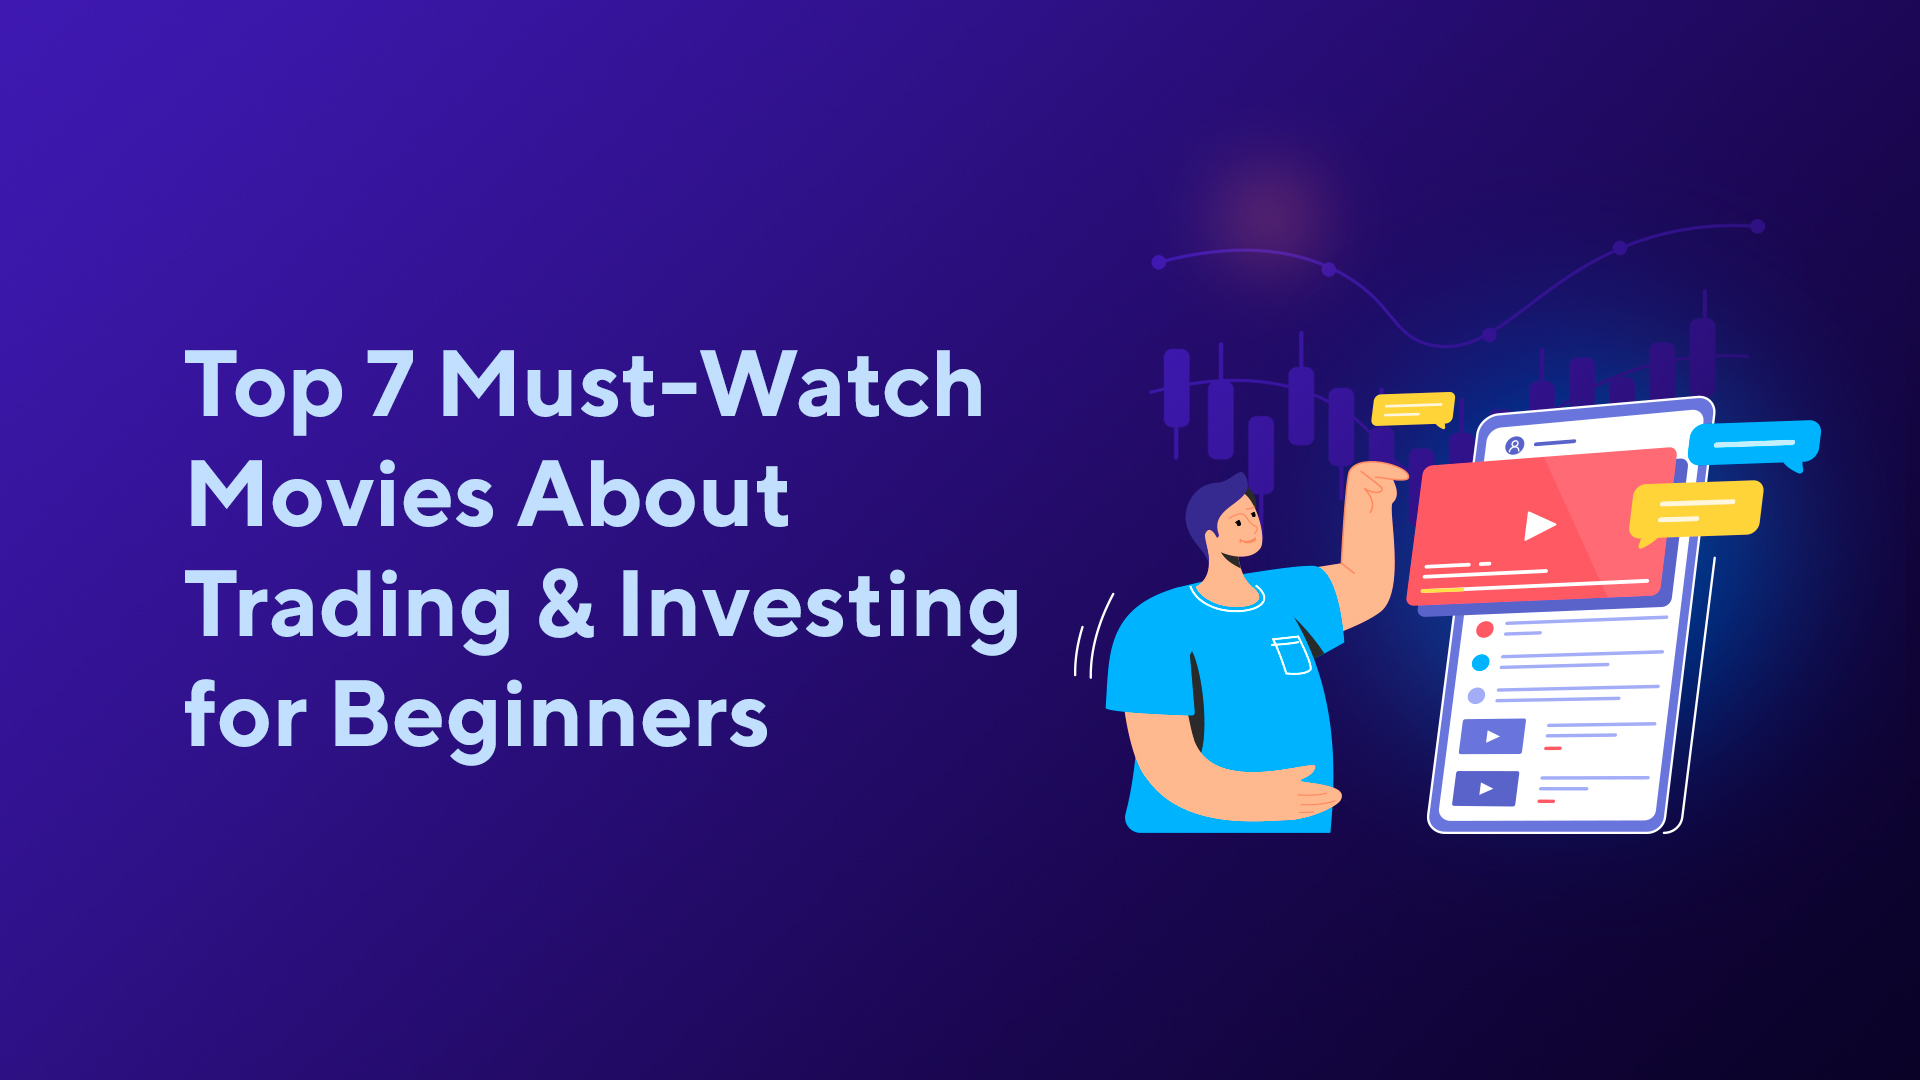 Top 7 Must-Watch Movies About Trading & Investing for Beginners